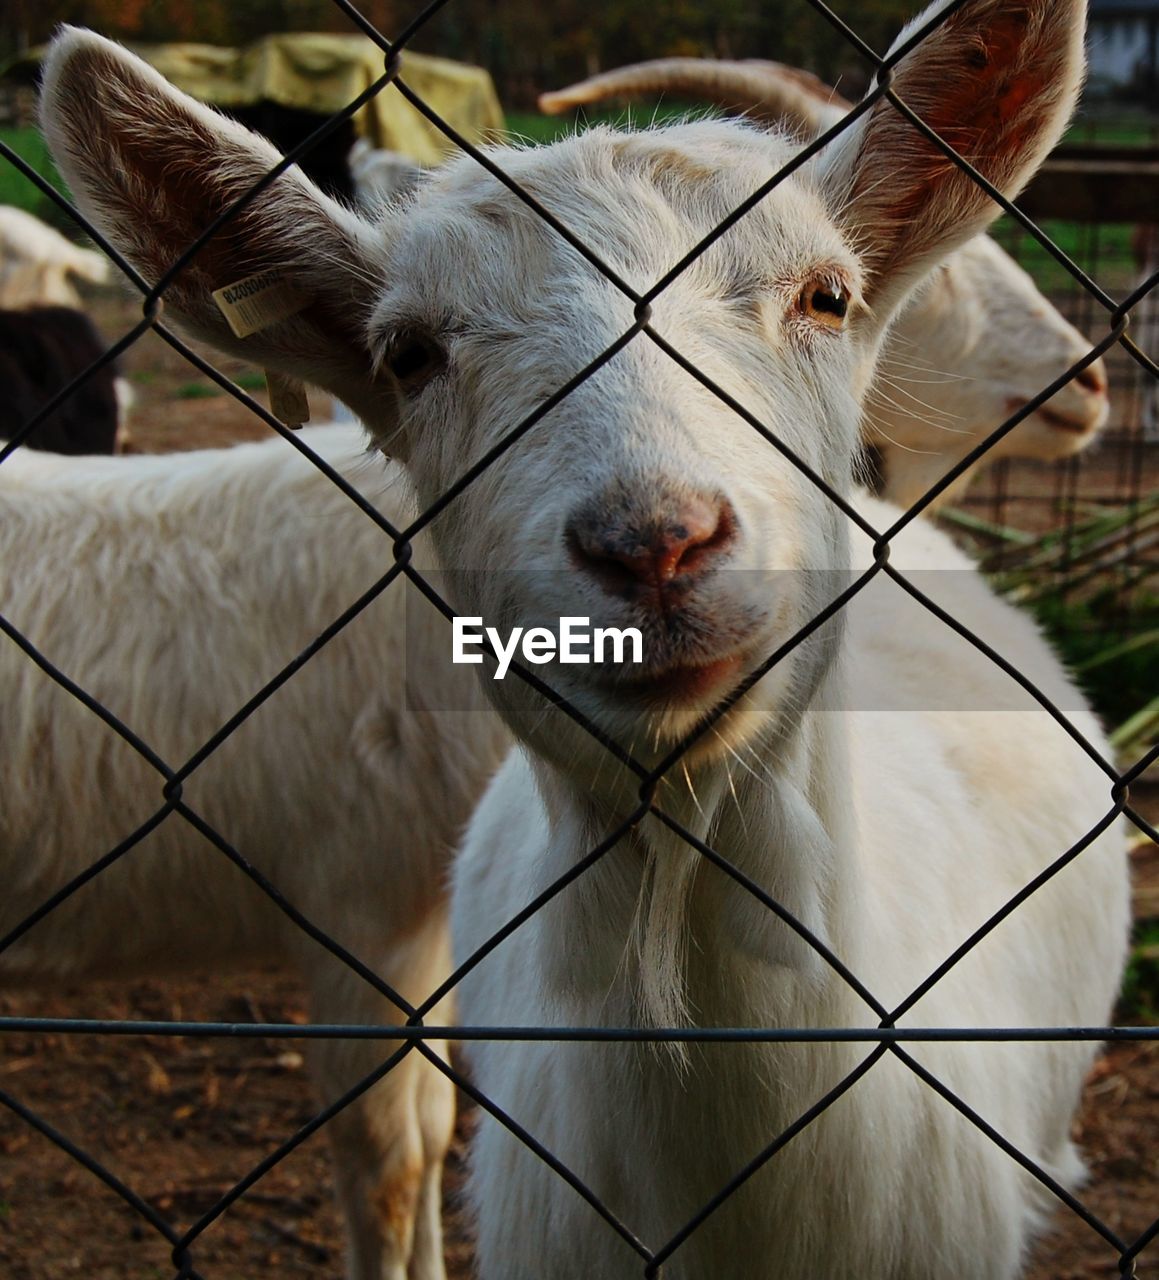 Close-up portrait of goat seen through chainlink fence